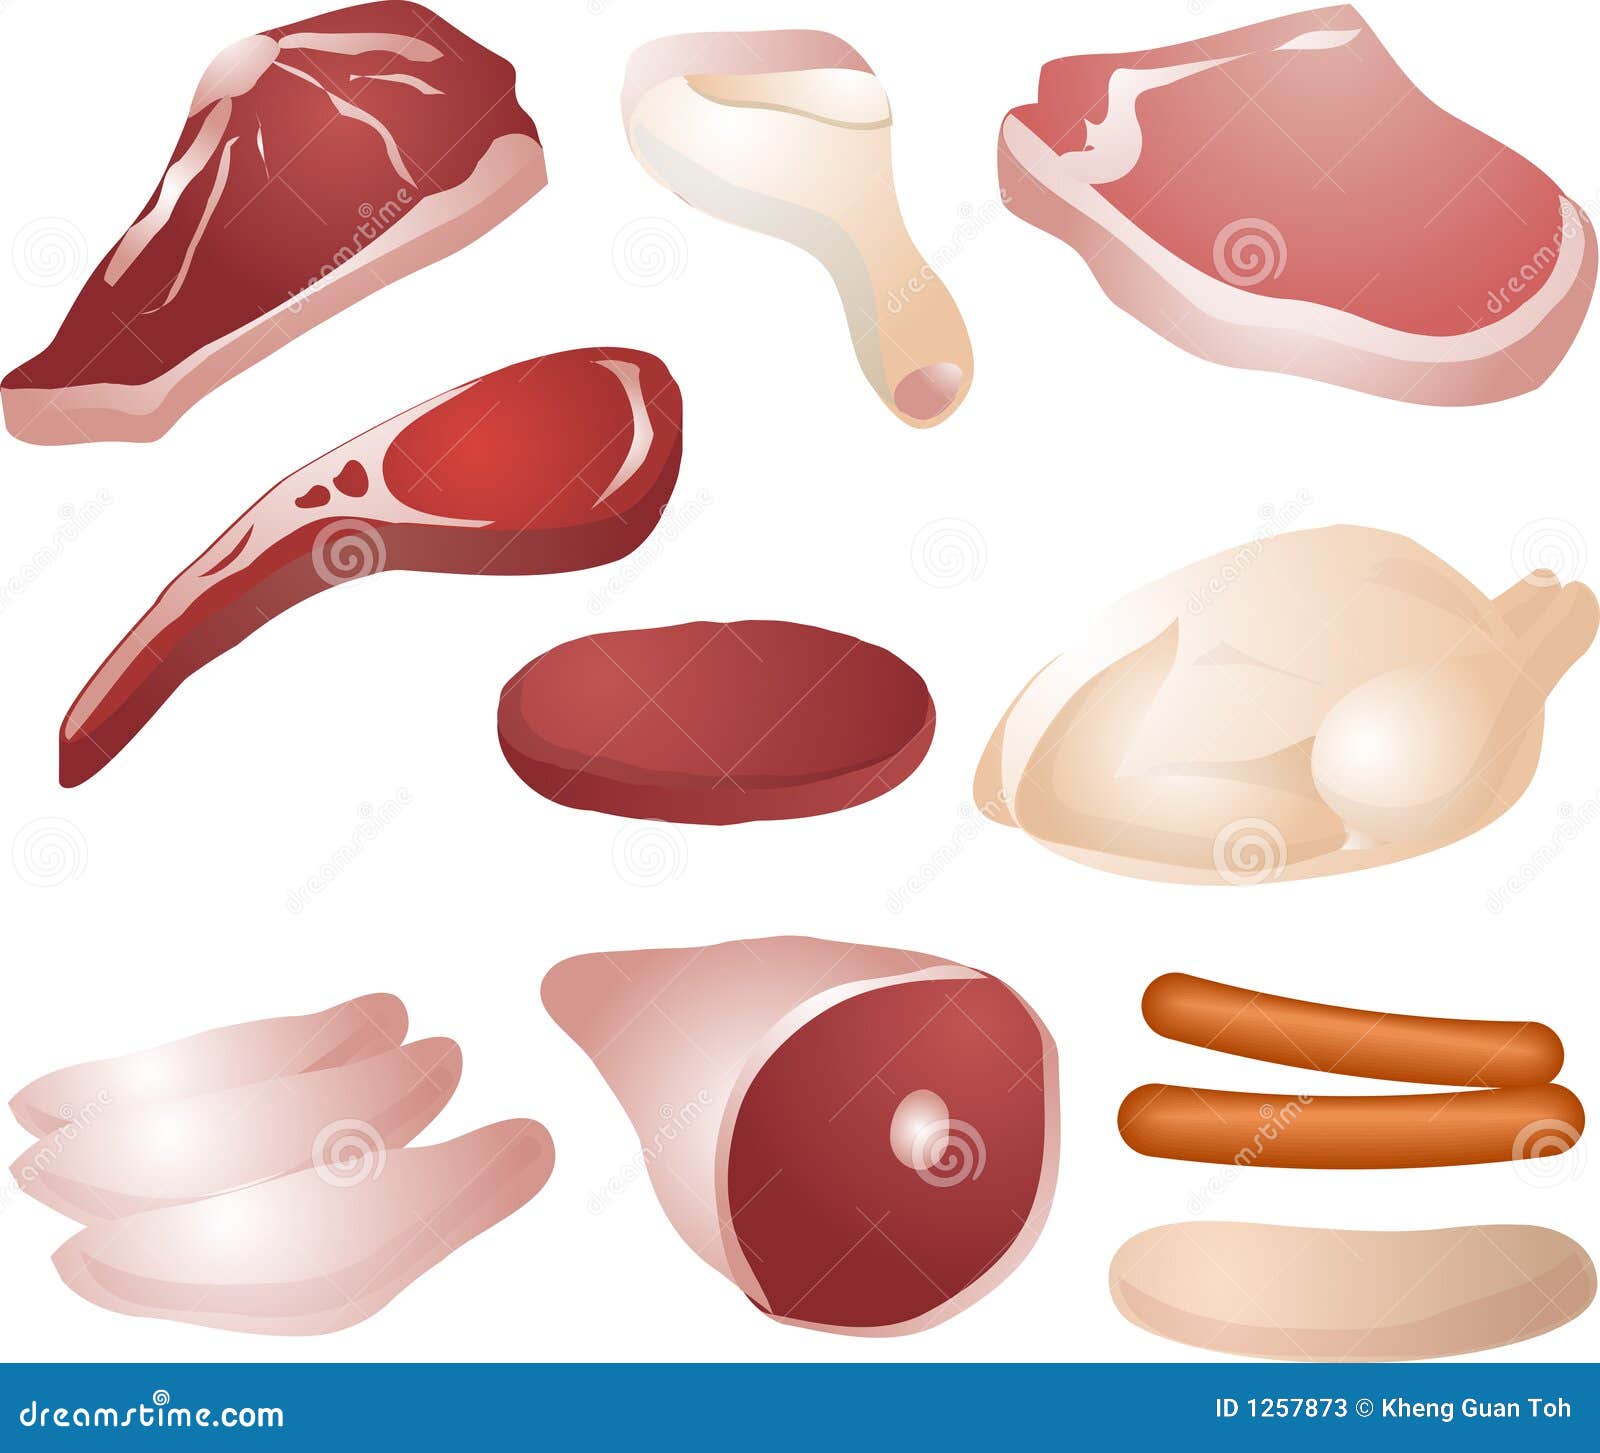 raw meat clipart - photo #16